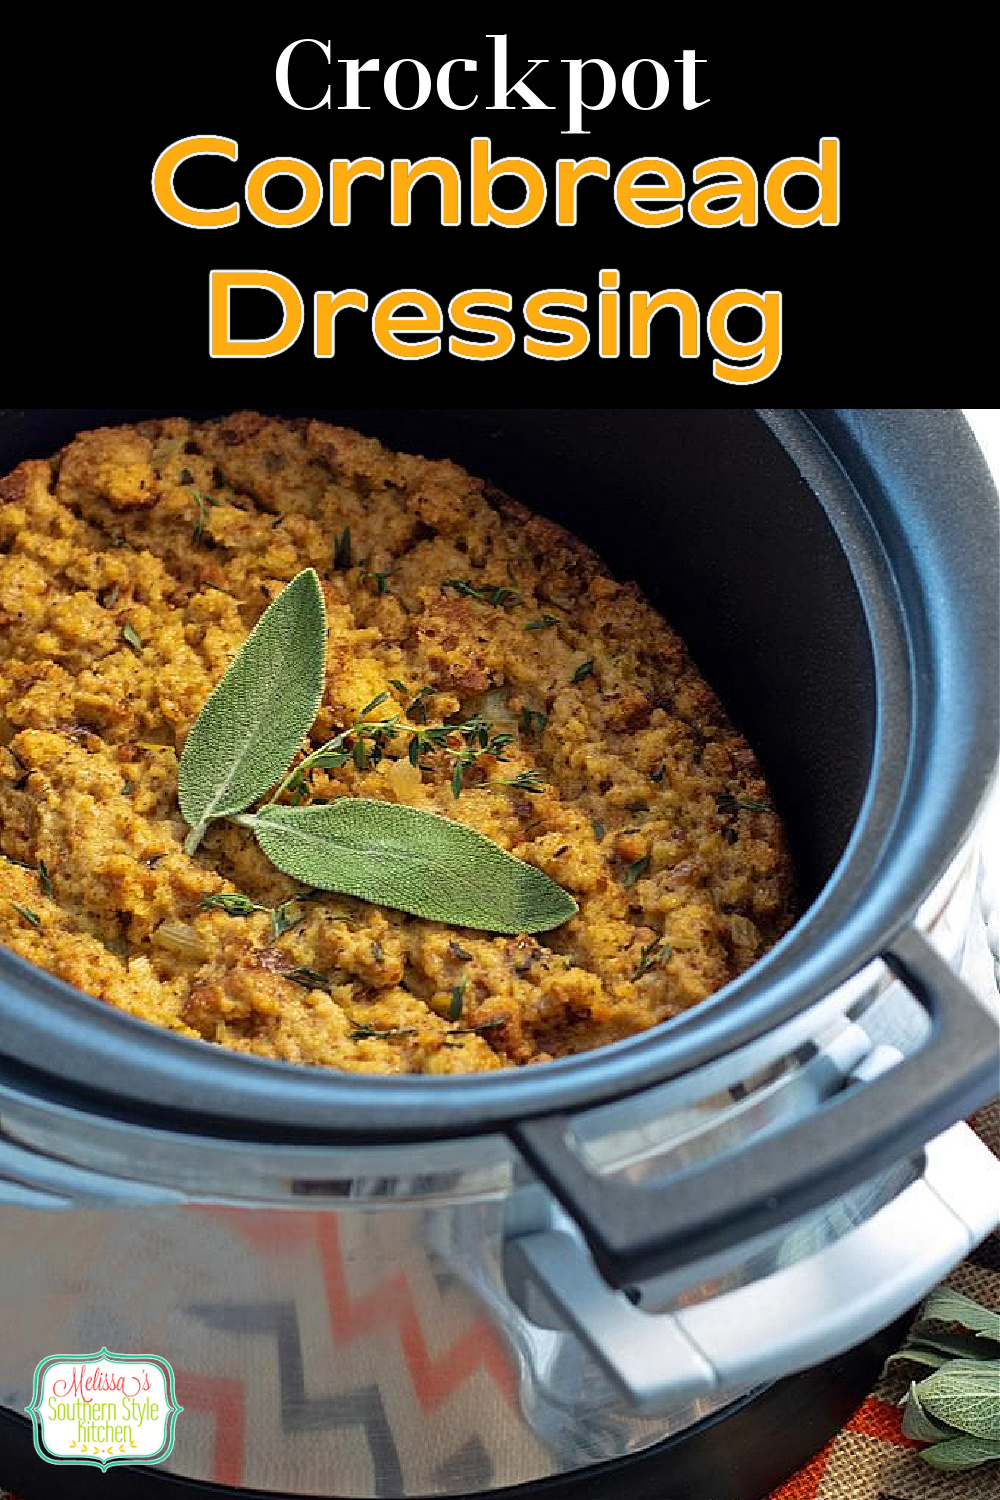 Free up oven space and make mouthwatering cornbread dressing in your crockpot #cornbreadressing #slowcookerrecipes #southerncornbreaddressing #crockpotdressing #easycornbreaddressing #bestthanksgivingrecipes via @melissasssk